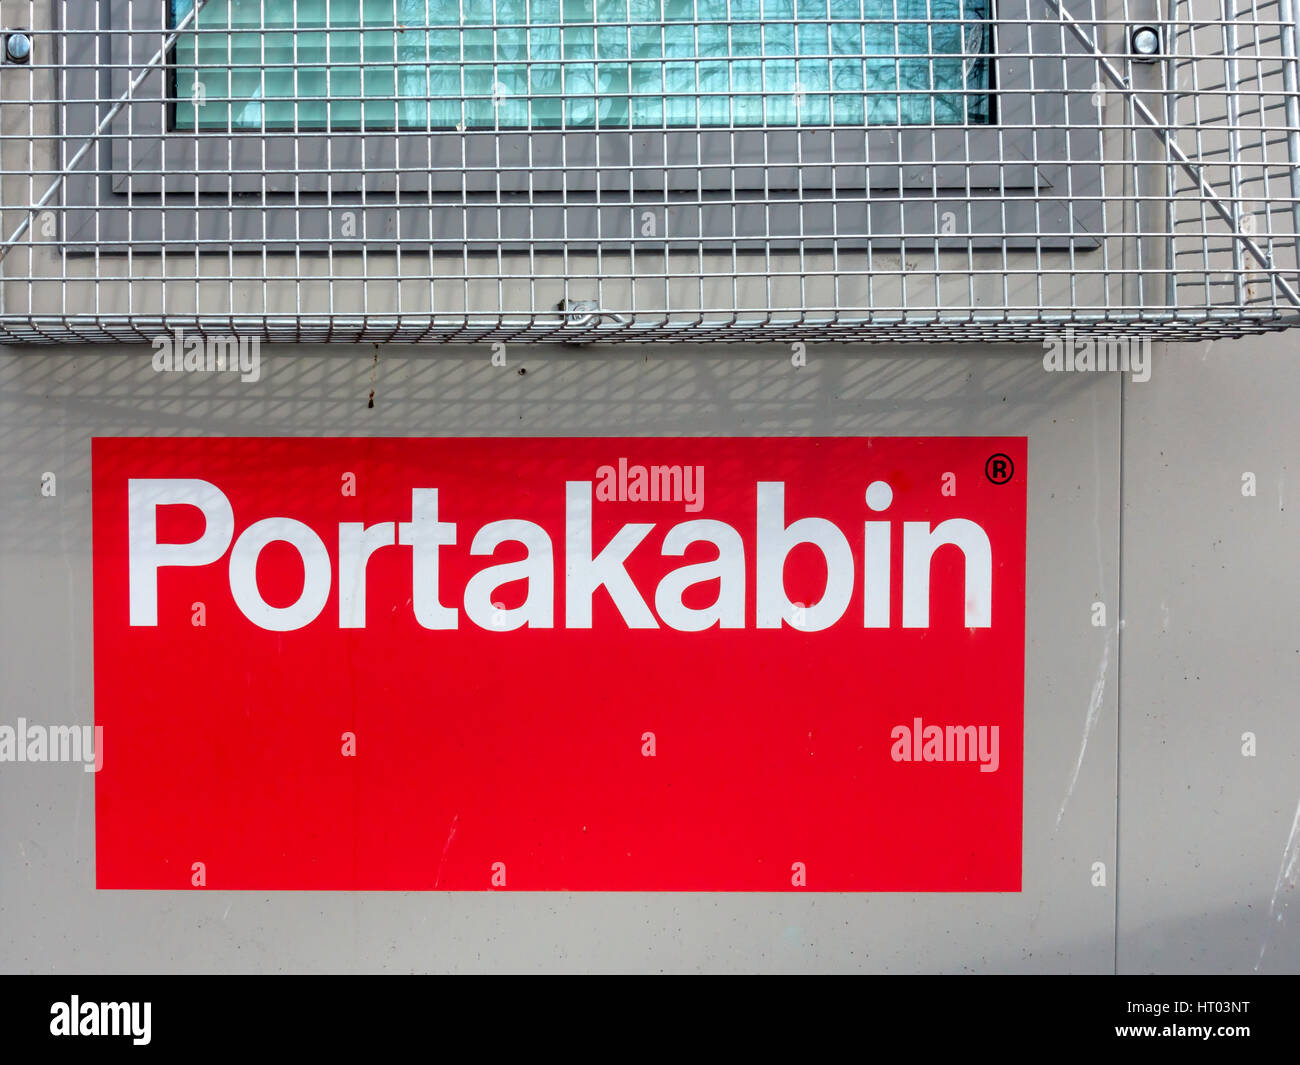 Name 'Portakabin' on a portable temporary building on hire for use as an office or workshop removable self contained and energy saving Stock Photo